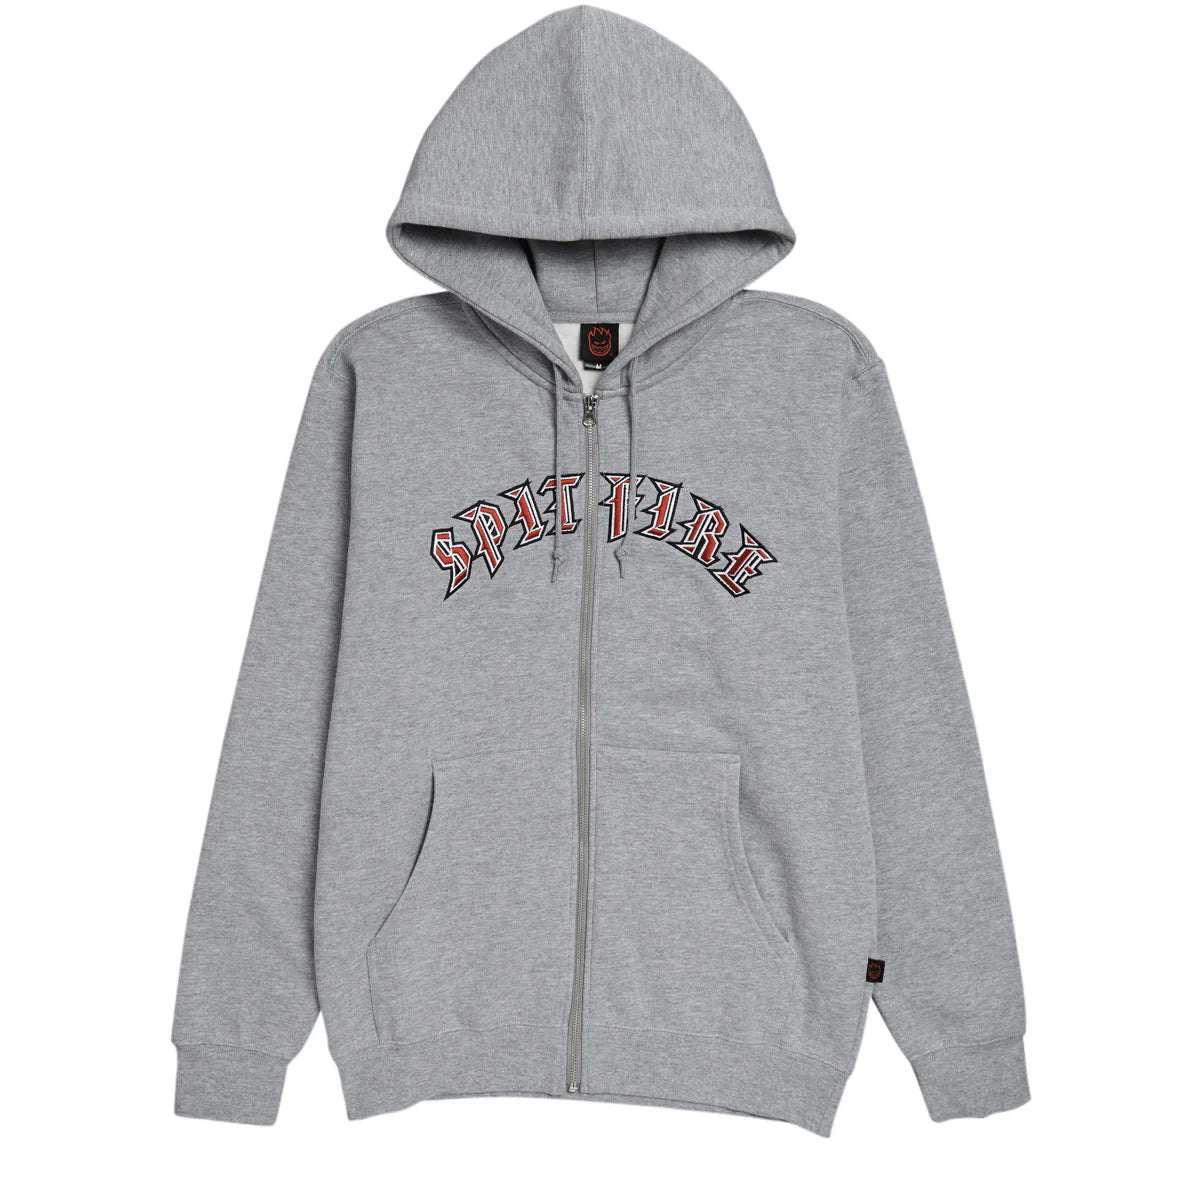 Spitfire Old E Arch Zip Up Hoodie - Heather Grey / Red / White